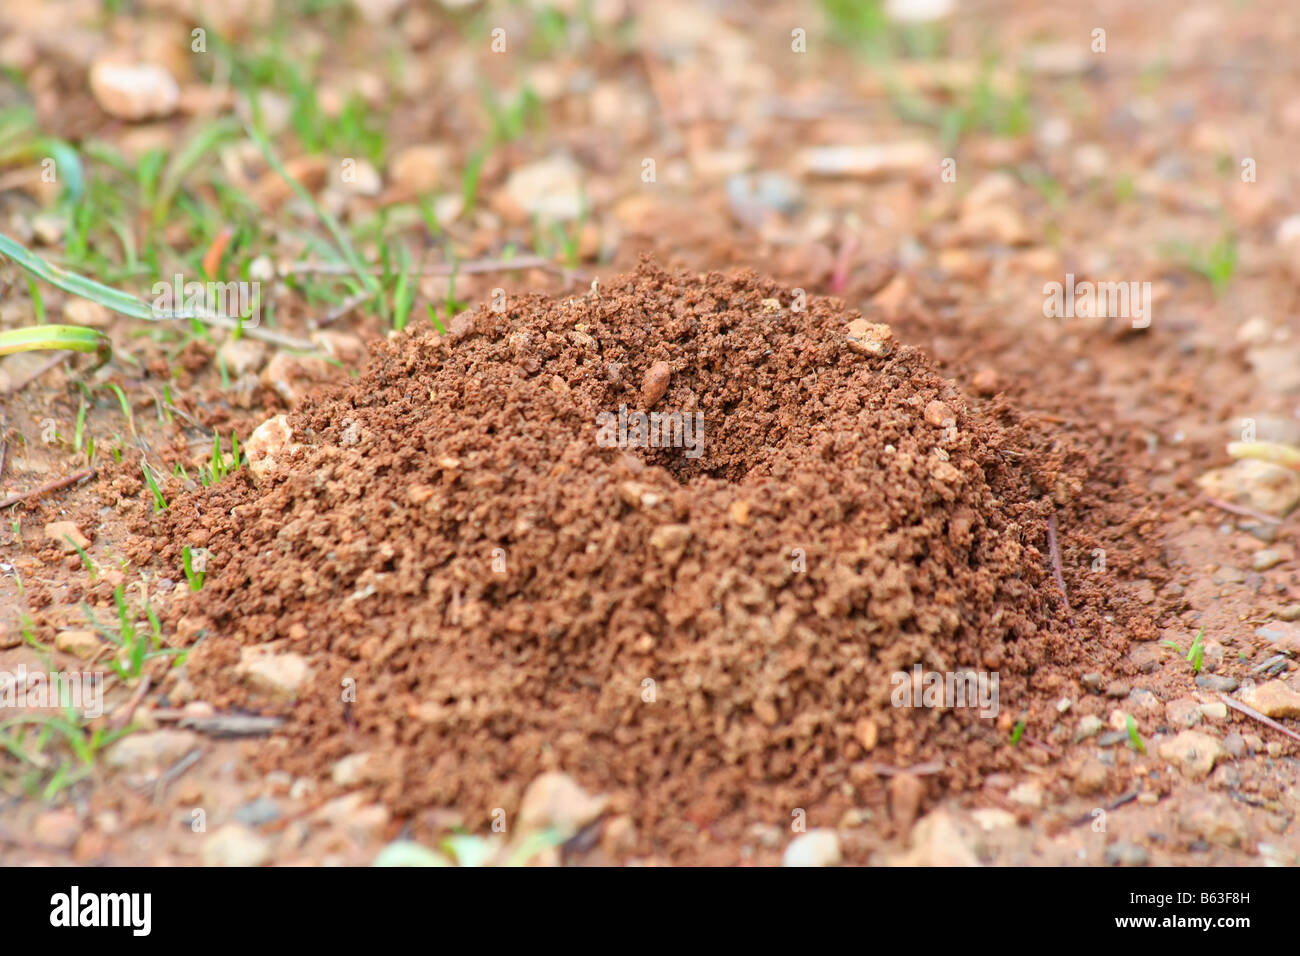 The entrance of an ant home Shallow depth of field Stock Photo